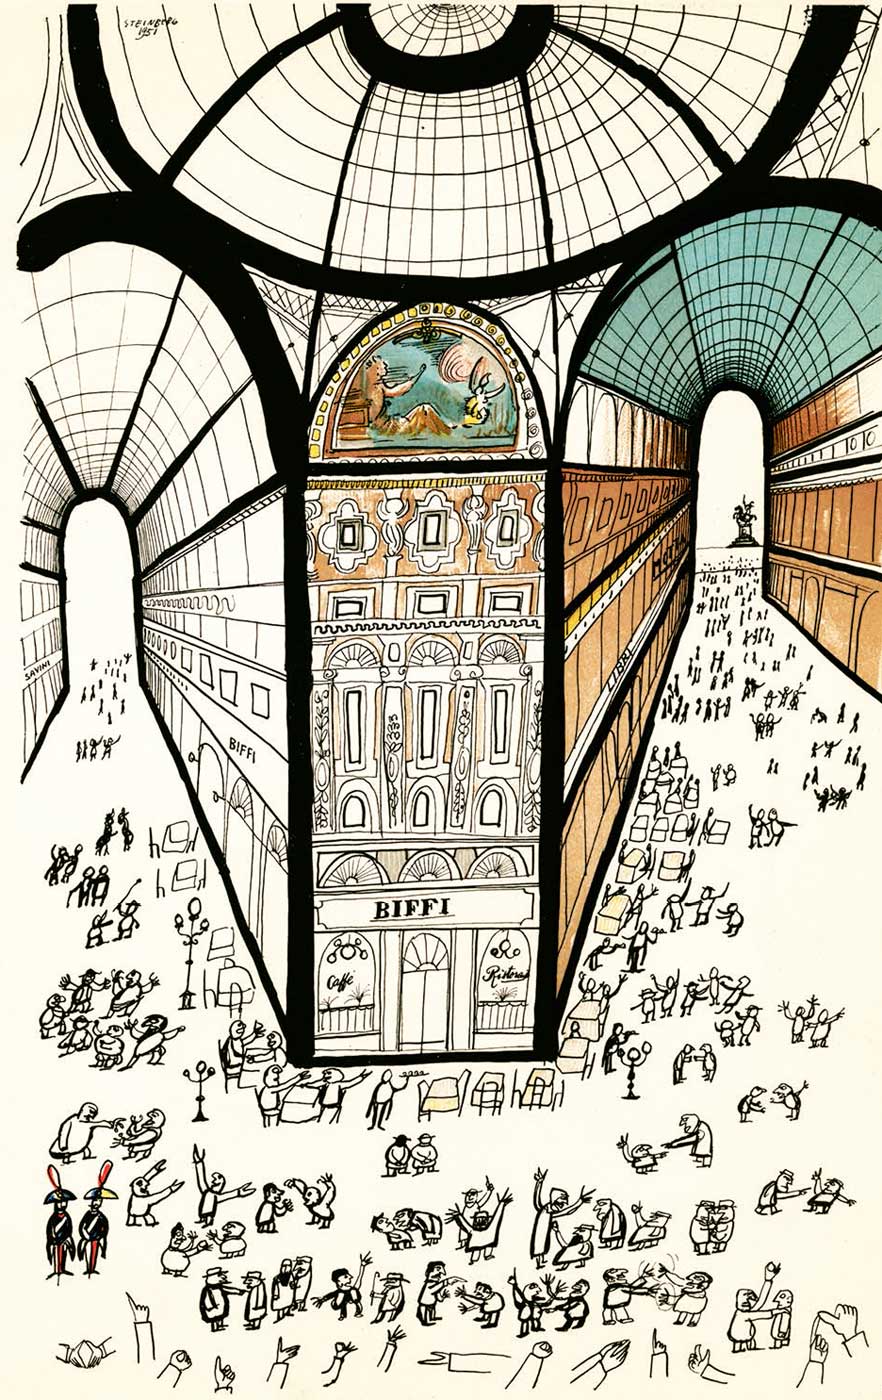 <em>Galleria di Milano</em>, 1951. Ink and watercolor on paper, 23 x 14 ½ in. Private collection.